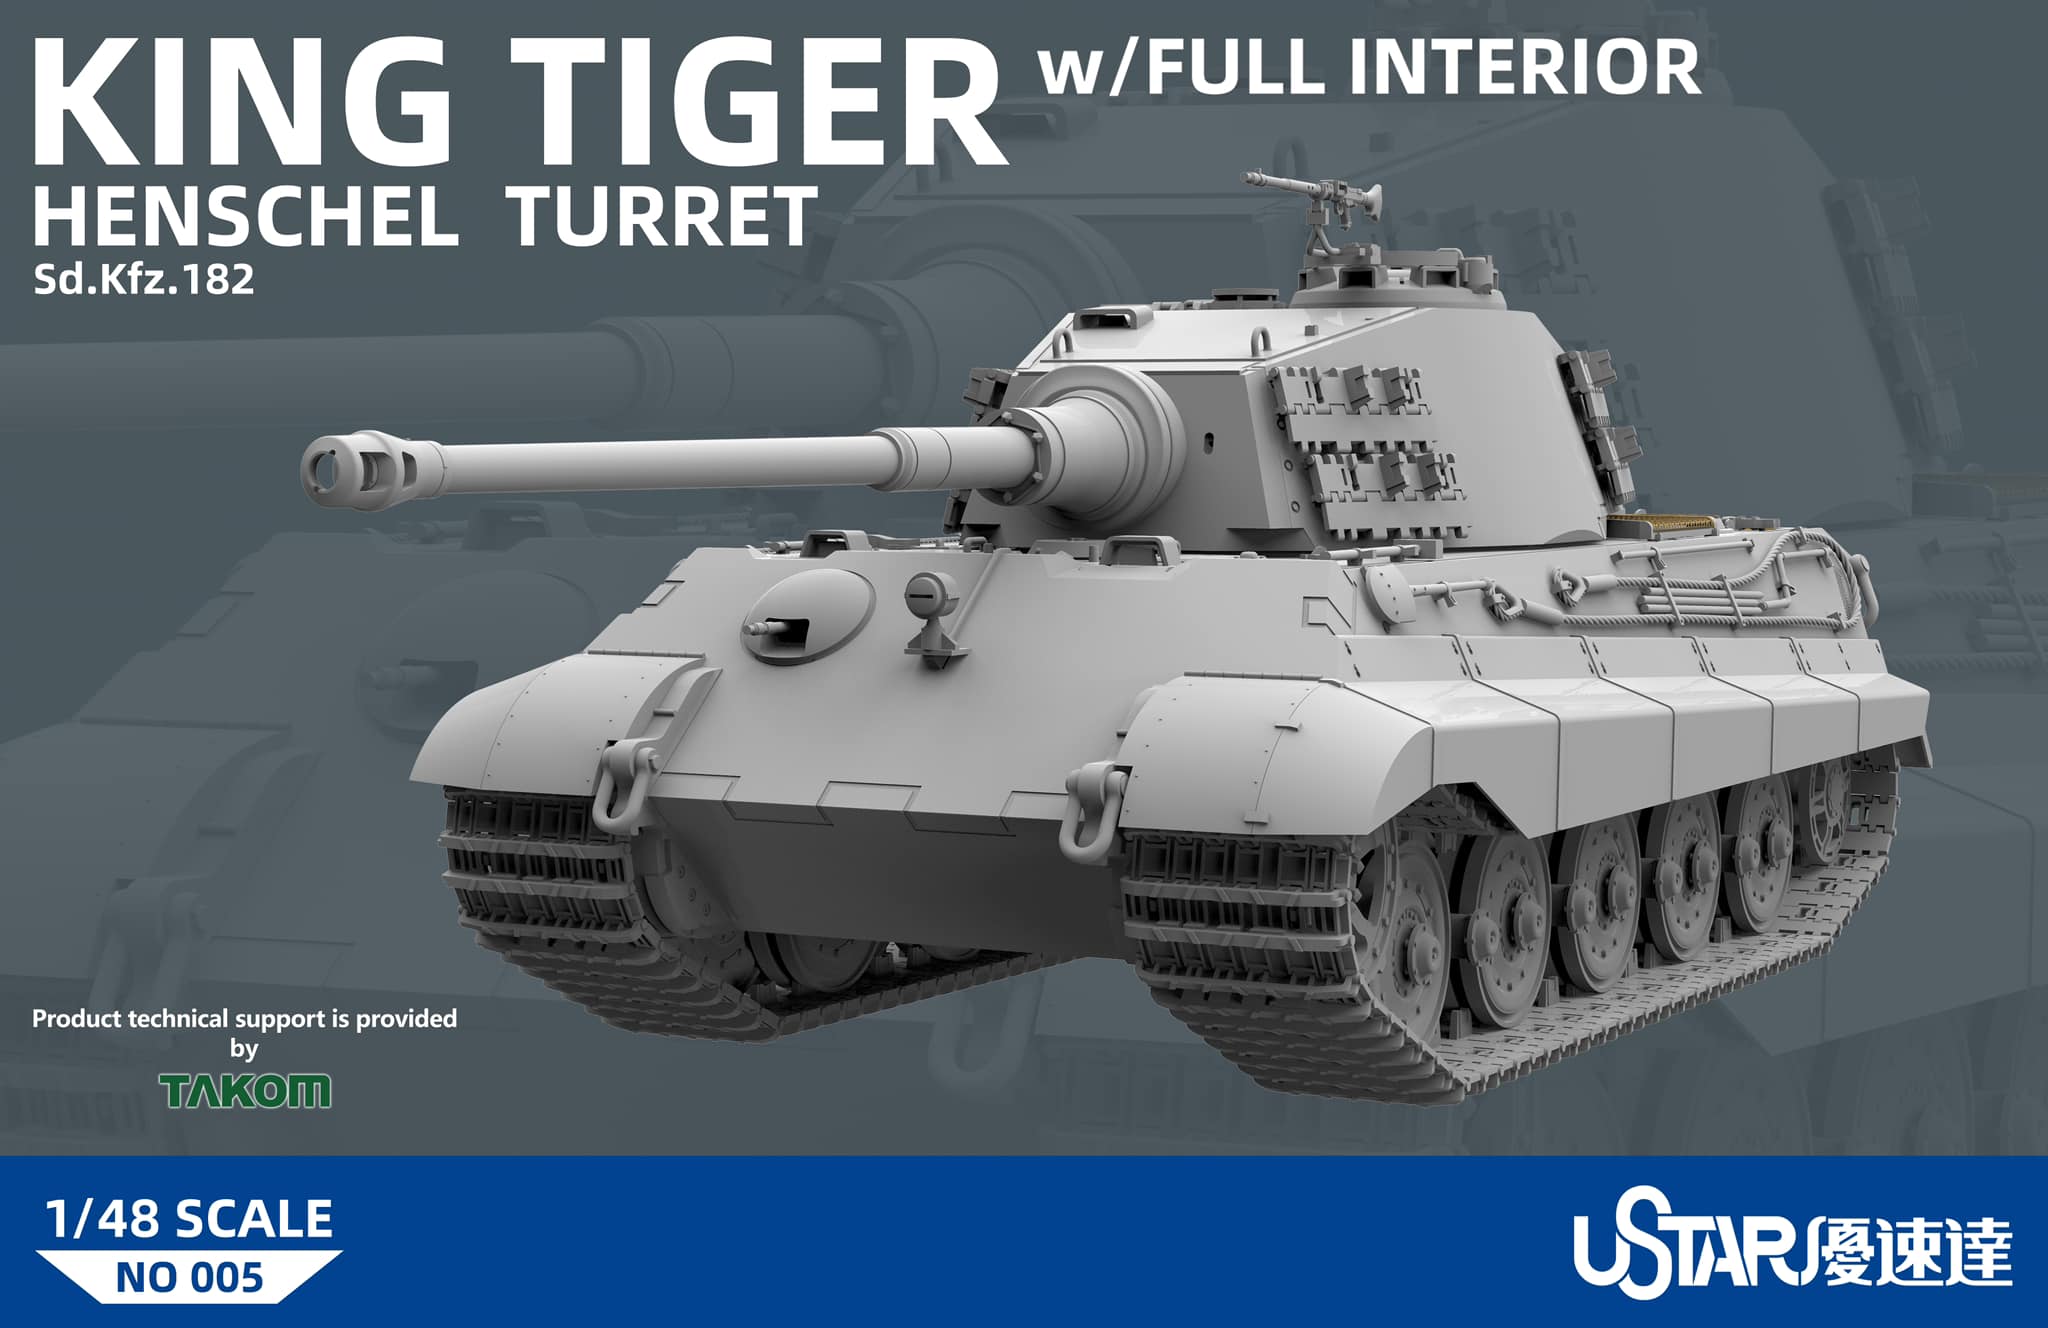 UStar KING TIGER Sd.Kfz. 182 with FULL INTERIOR 1/48 scale model